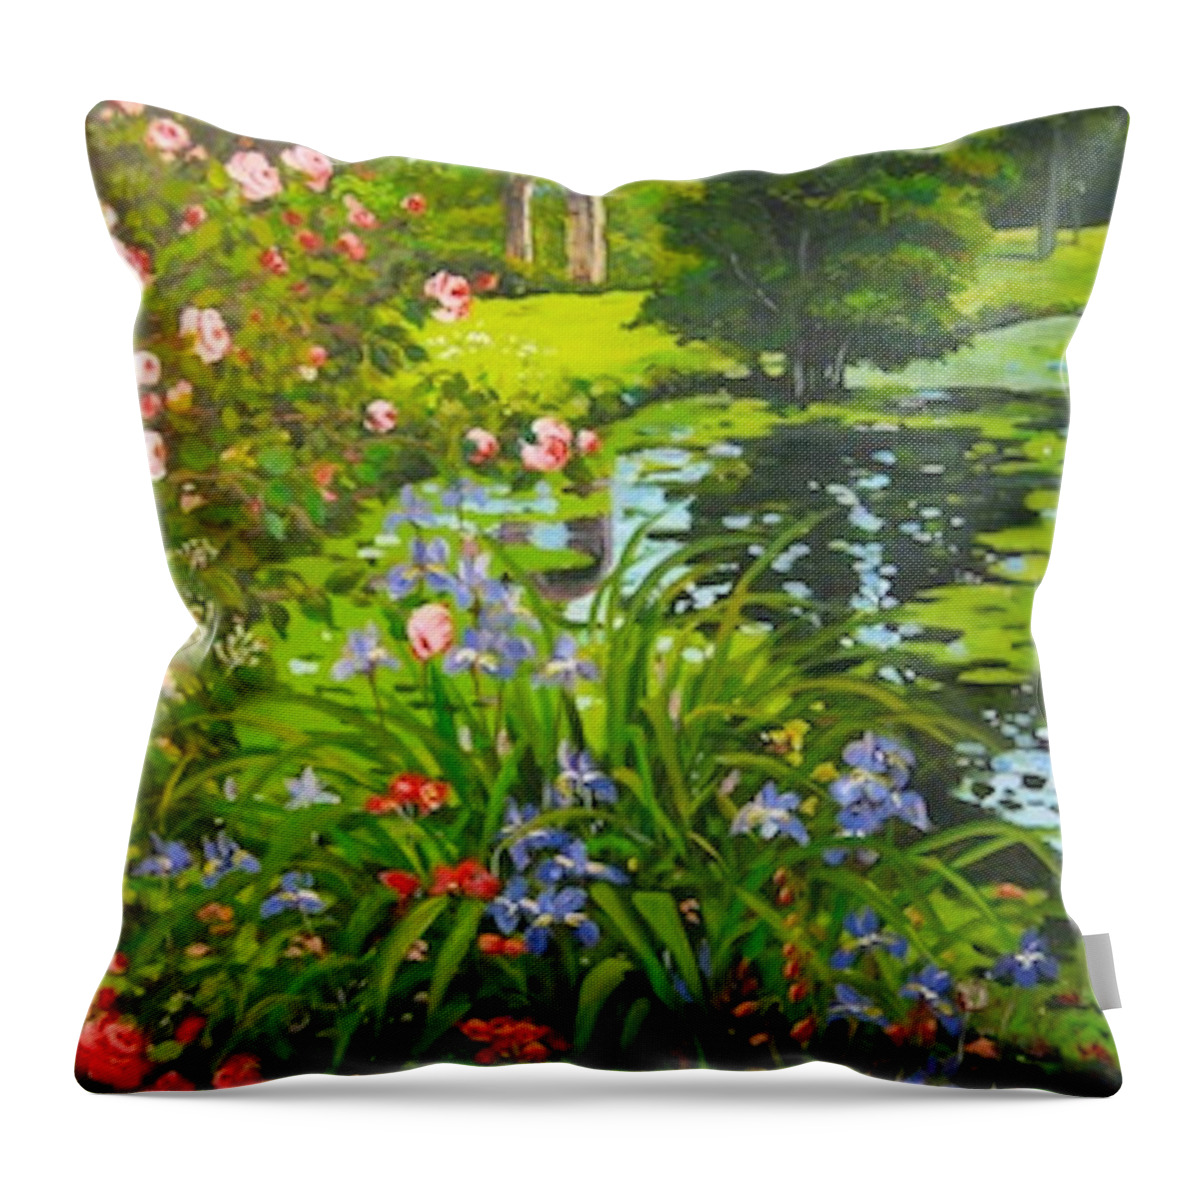 Landscape Throw Pillow featuring the painting Irises on the Pond by Ingrid Dohm